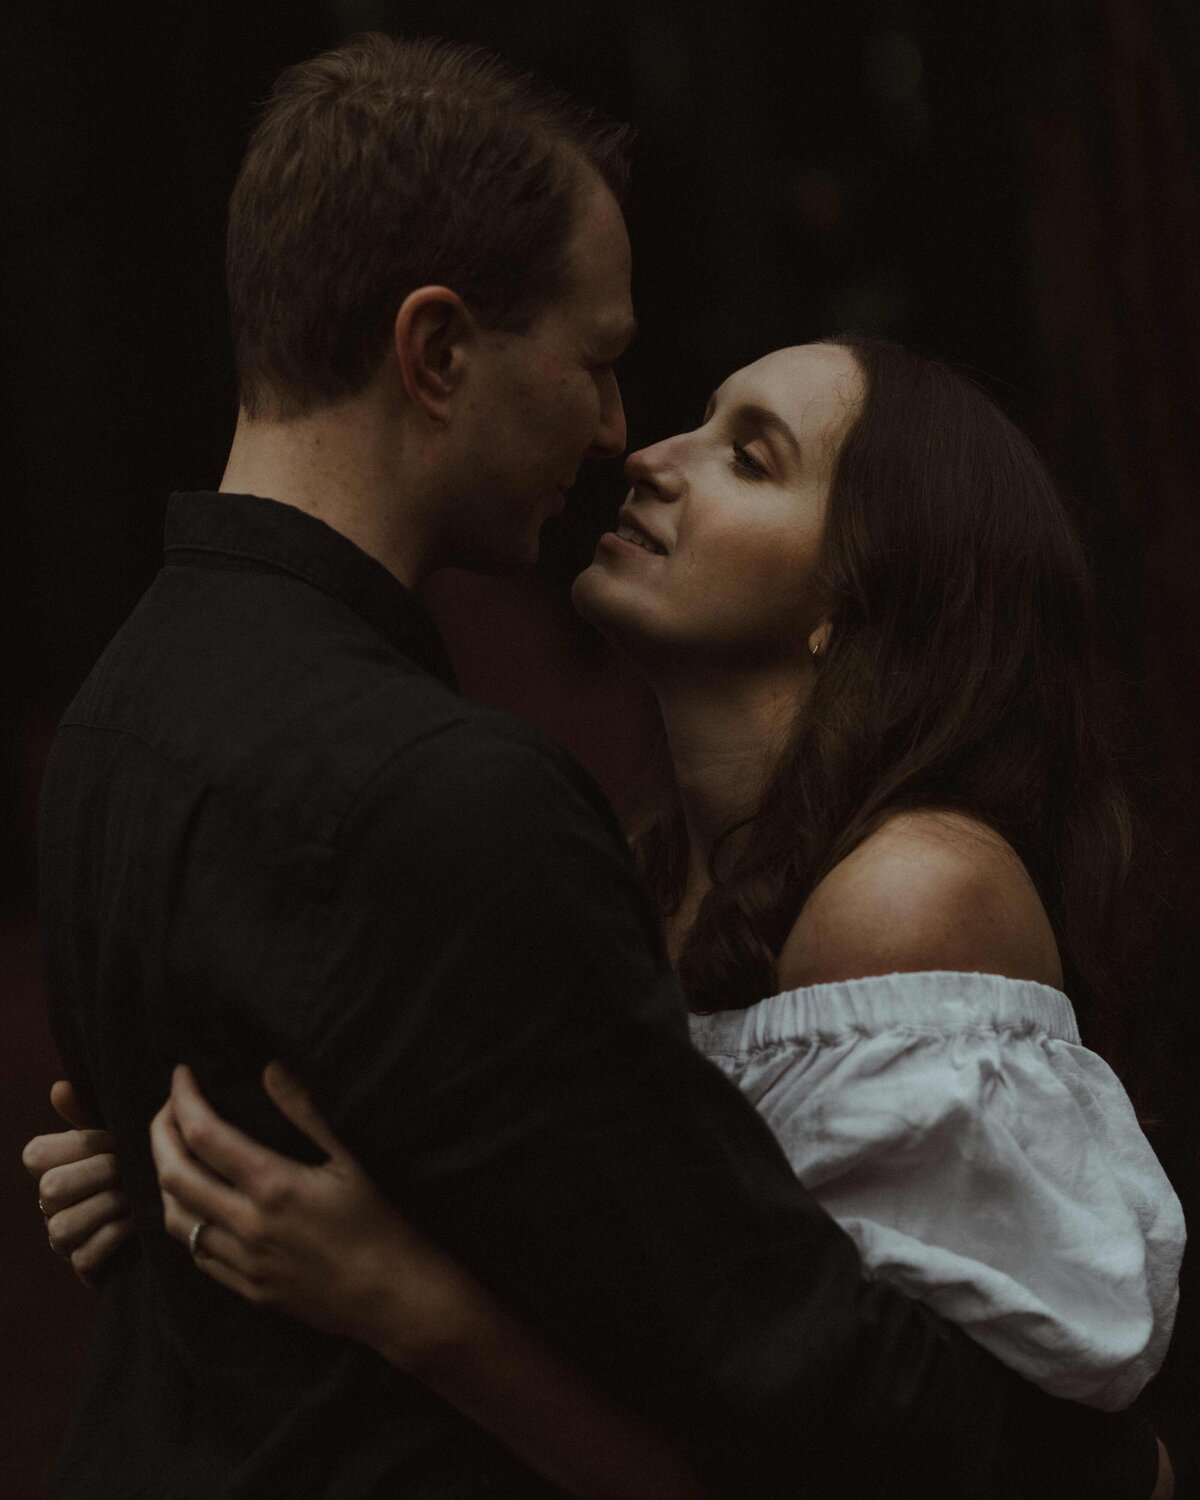 Cinematic storytelling wedding photography in Melbourne captures couple gazing into each other's eyes during pre-wedding photoshoot.